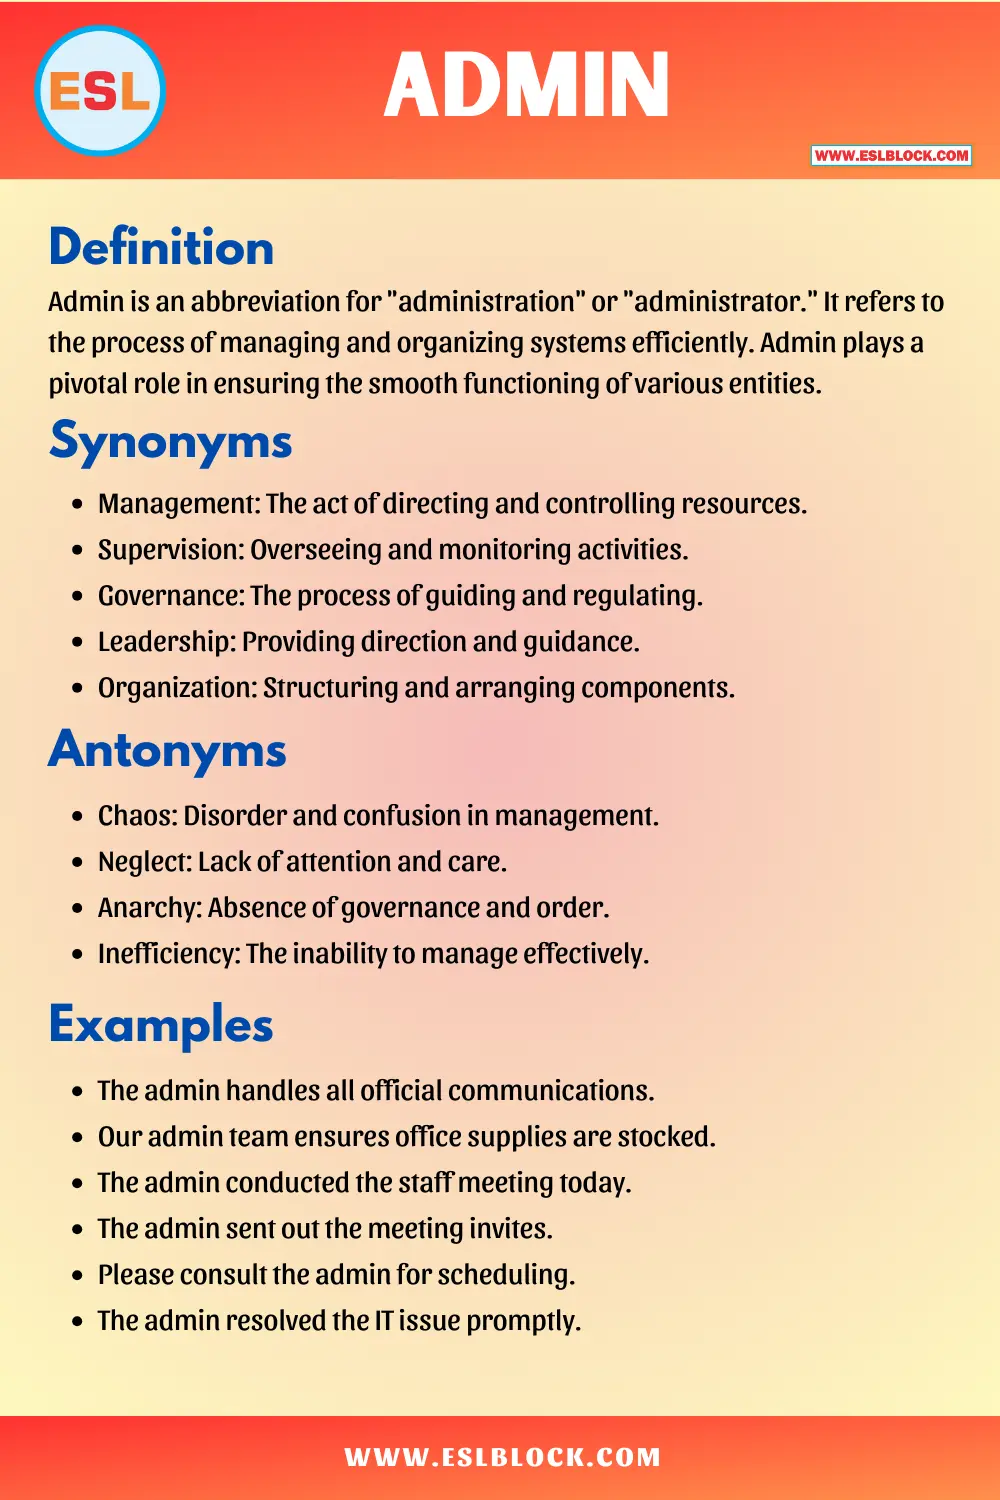 Additionally Synonyms, Antonyms, Meaning, Definition